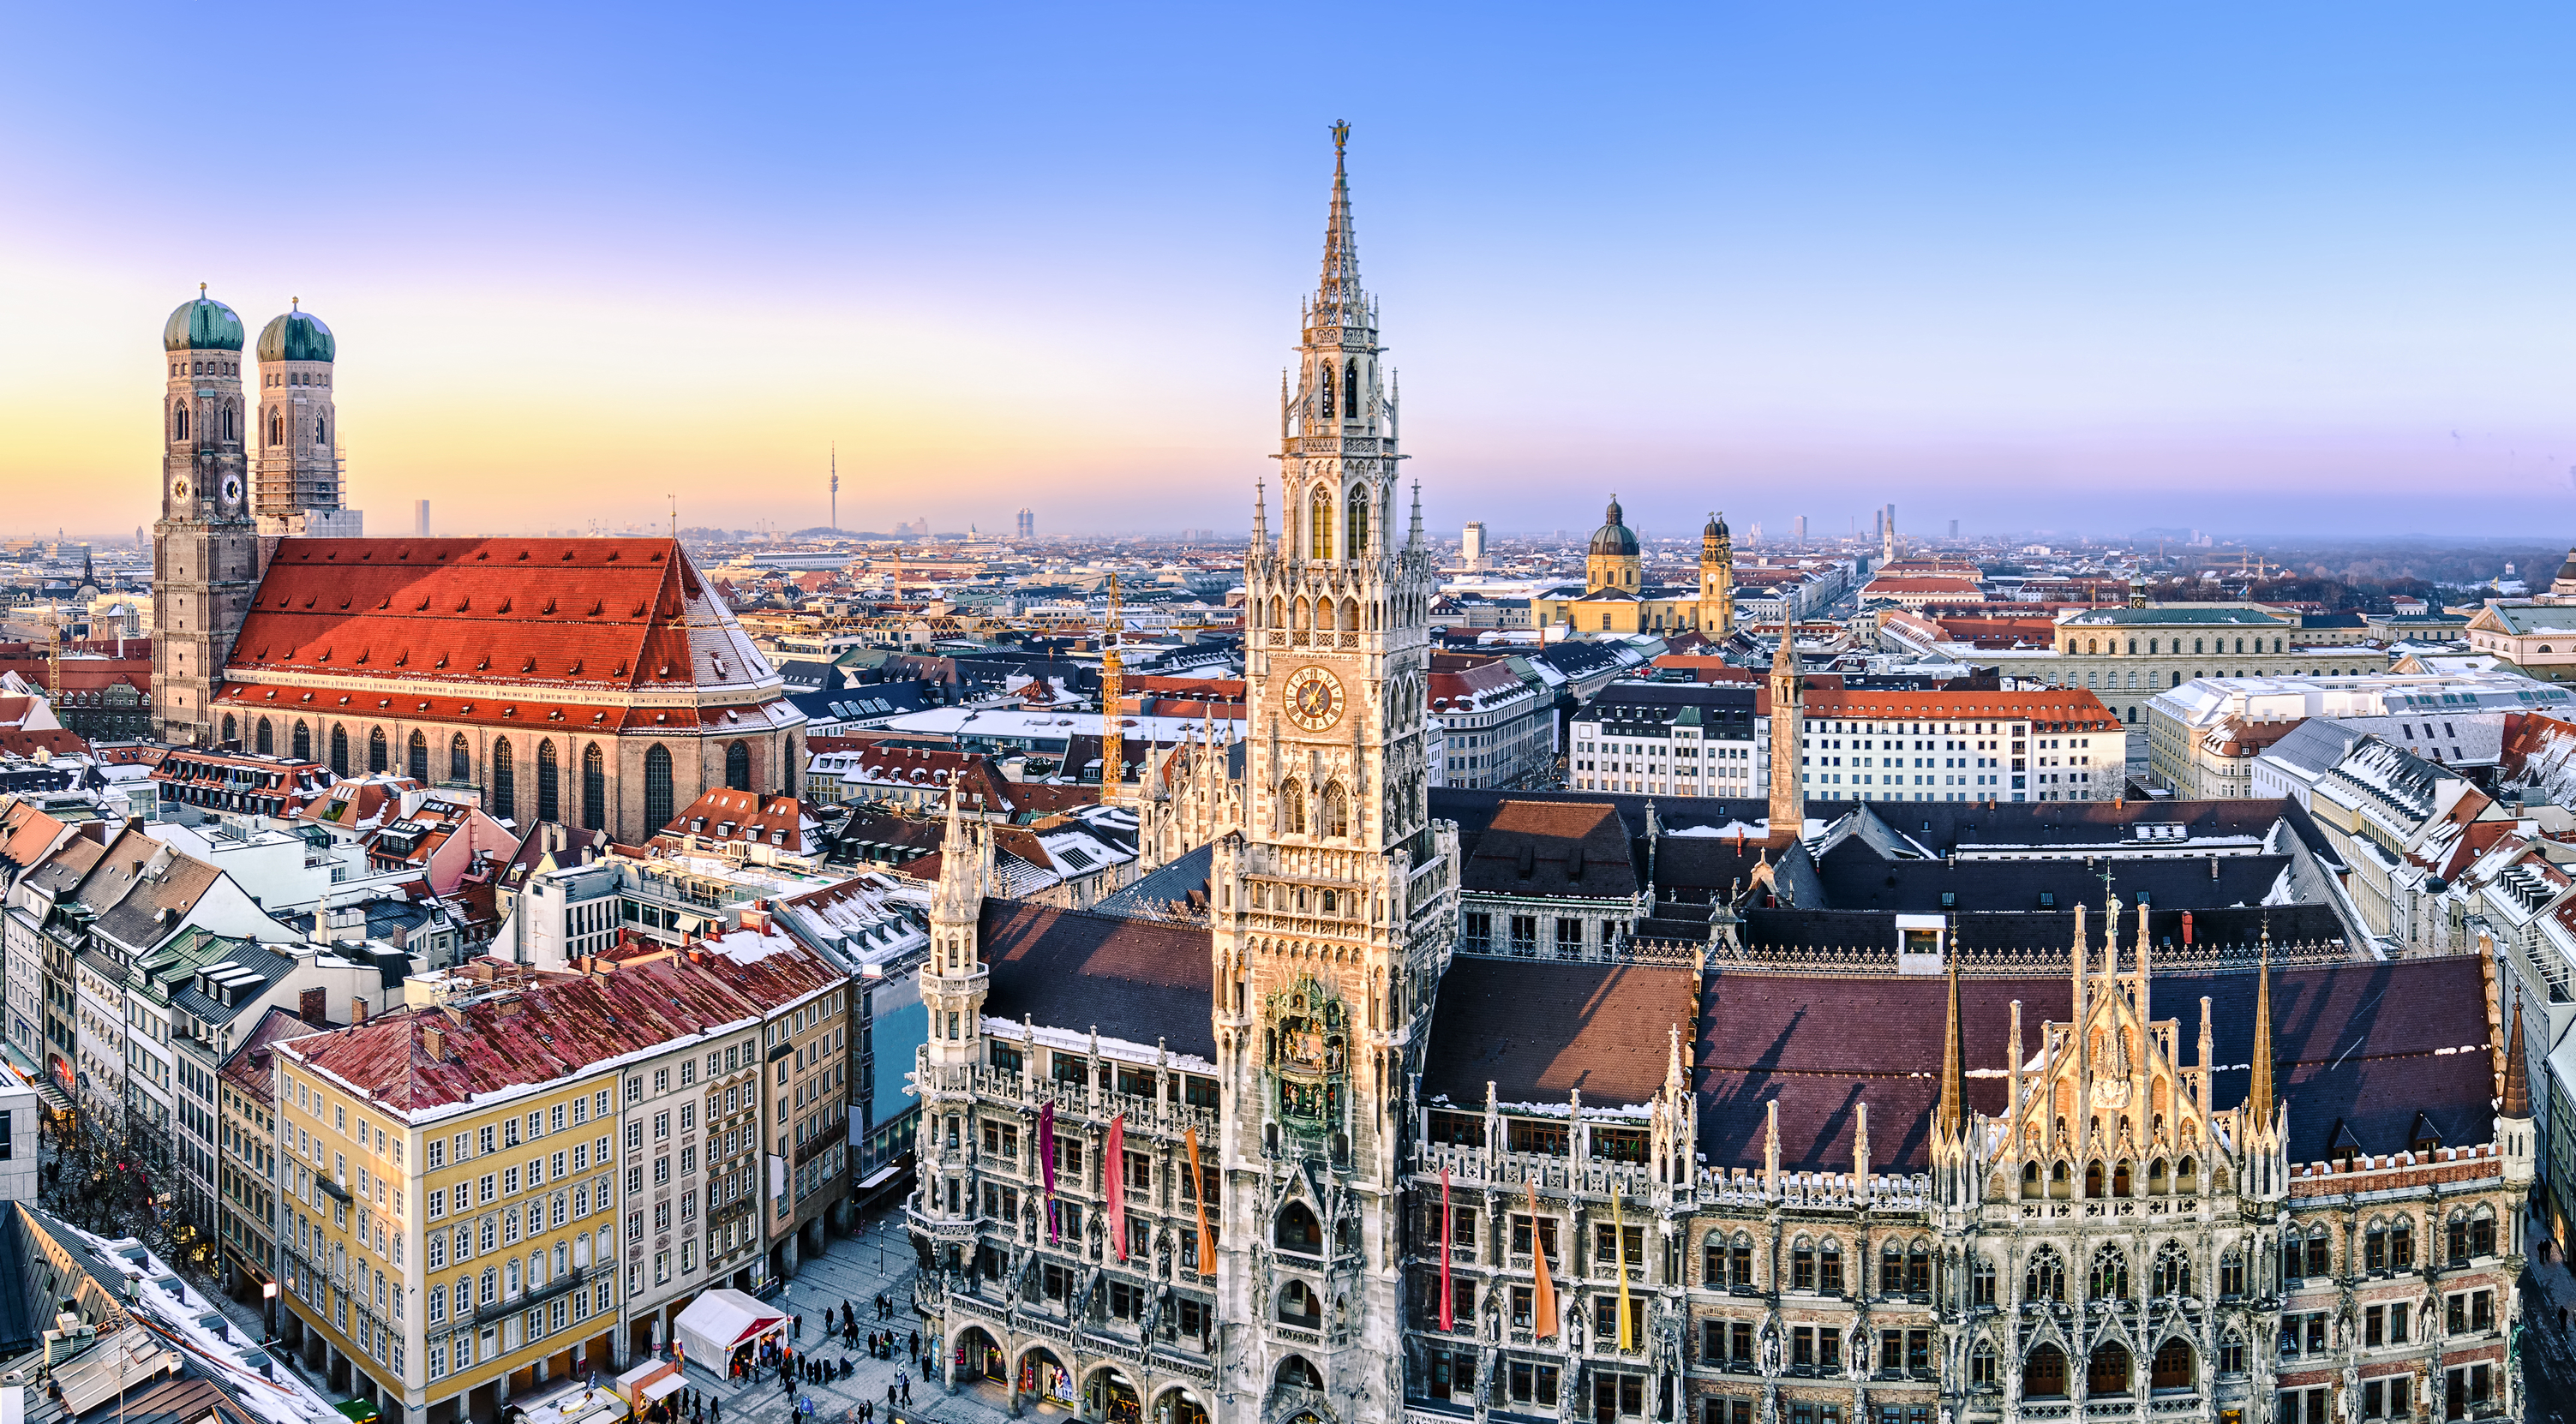 6-night, 4-city Germany guided tour with air from $1,399